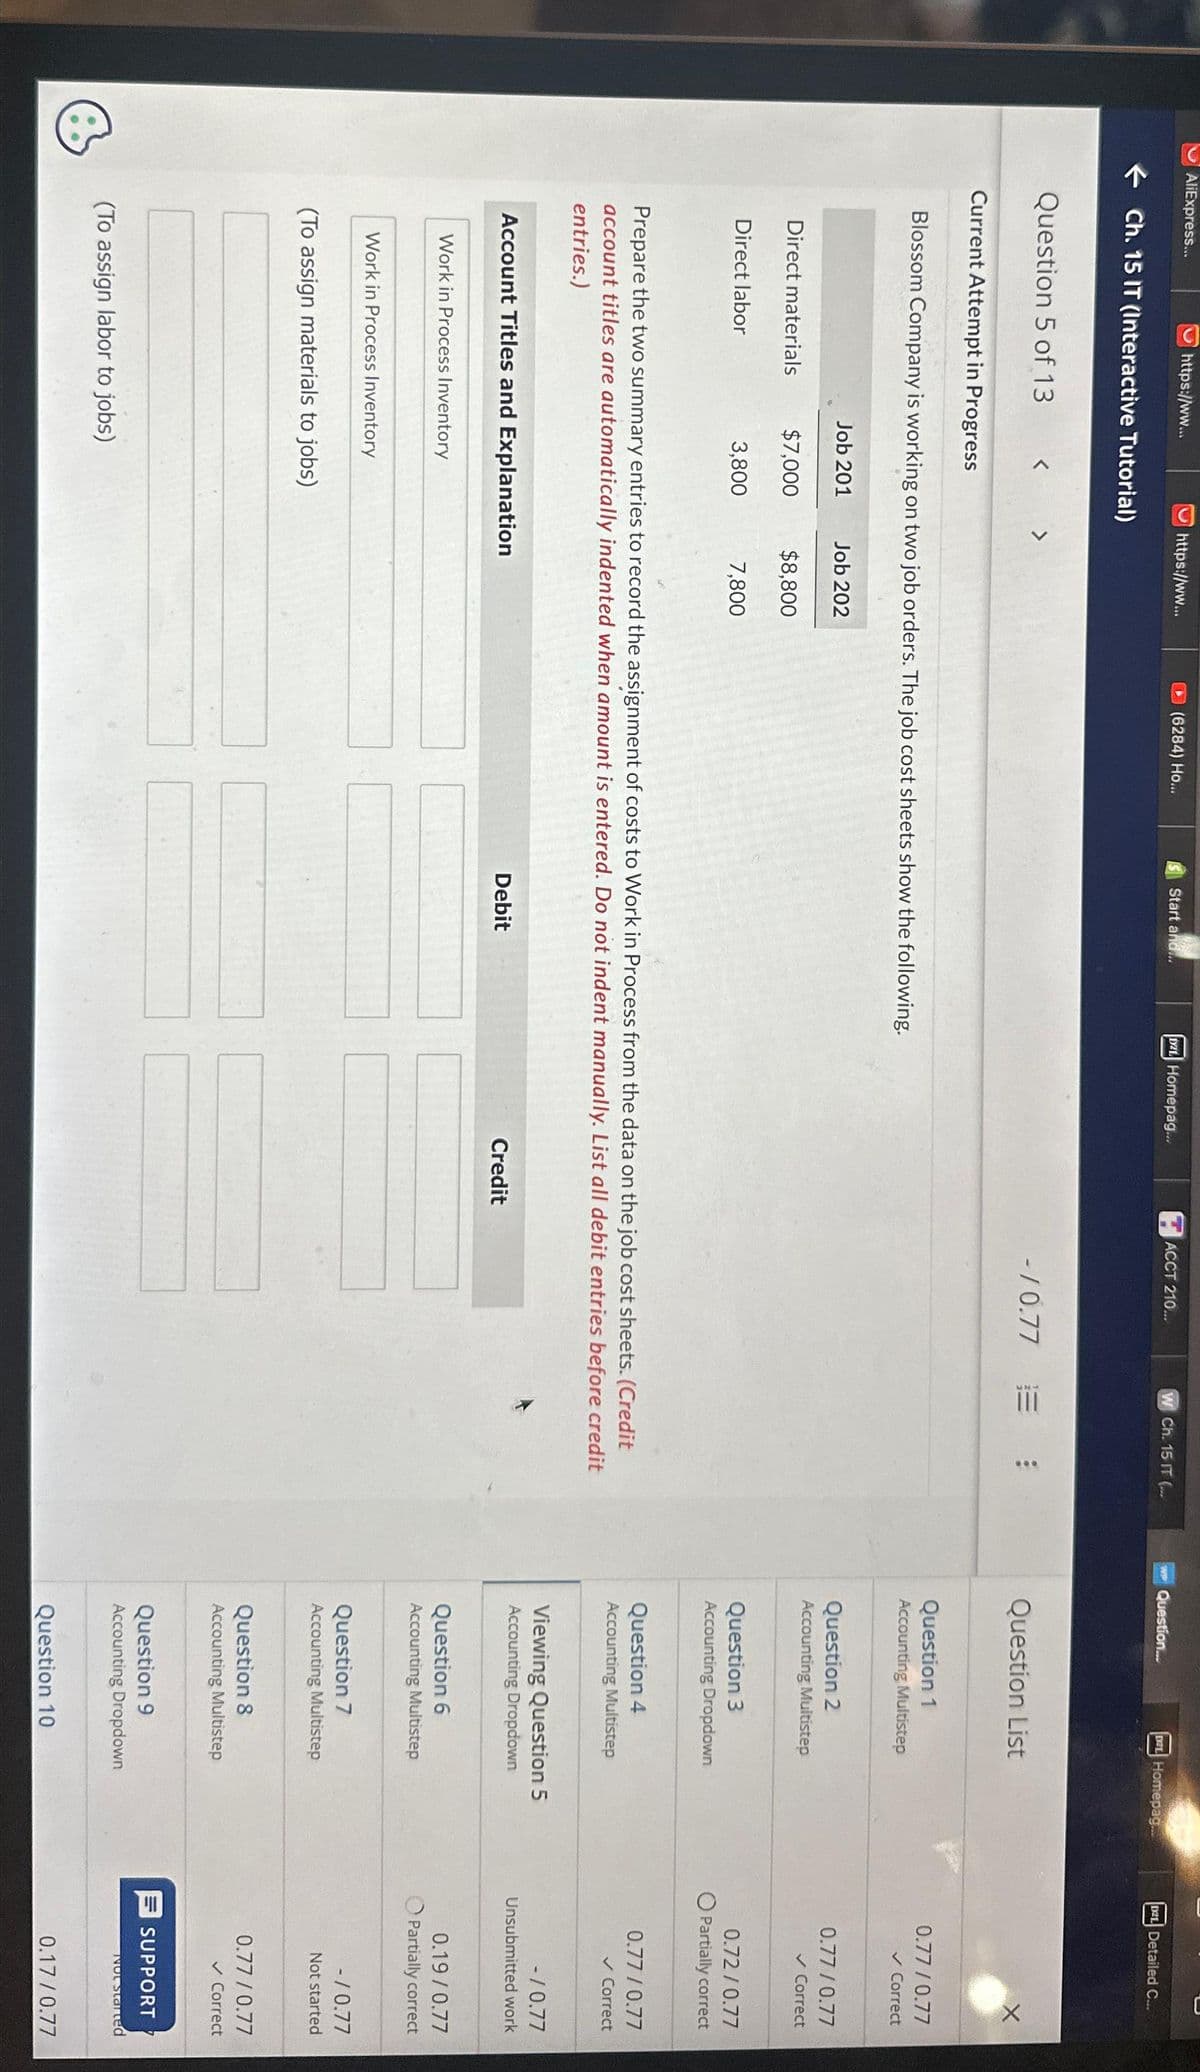 B
AliExpress...
https://ww...
Ch. 15 IT (Interactive Tutorial)
Question 5 of 13
Current Attempt in Progress
Direct materials
Direct labor
< >
Job 201
Blossom Company is working on two job orders. The job cost sheets show the following.
$7,000
3,800
https://ww...
Work in Process Inventory
Work in Process Inventory
Account Titles and Explanation
(To assign materials to jobs)
(To assign labor to jobs)
Job 202
$8,800
(6284) Ho...
7,800
Start and...
Prepare the two summary entries to record the assignment of costs to Work in Process from the data on the job cost sheets. (Credit
account titles are automatically indented when amount is entered. Do not indent manually. List all debit entries before credit
entries.)
DZL Homepag...
Debit
ACCT 210...
Credit
W Ch. 15 IT (...
-/0.77 :
WP Question...
DEL Homepag...
Question List
Question 1
Accounting Multistep
Question 2
Accounting Multistep
Question 3
Accounting Dropdown
Question 4
Accounting Multistep
Viewing Question 5
Accounting Dropdown
Question 6
Accounting Multistep
Question 7
Accounting Multistep
Question 8
Accounting Multistep
Question 9
Accounting Dropdown
Question 10
C
D2L Detailed C...
X
0.77/0.77
✓ Correct
0.77/0.77
✓ Correct
0.72/0.77
O Partially correct
0.77/0.77
✓ Correct
-/0.77
Unsubmitted work
0.19/0.77
Partially correct
-/0.77
Not started
0.77/0.77
✓ Correct
SUPPORT
Not started
0.17 /0.77